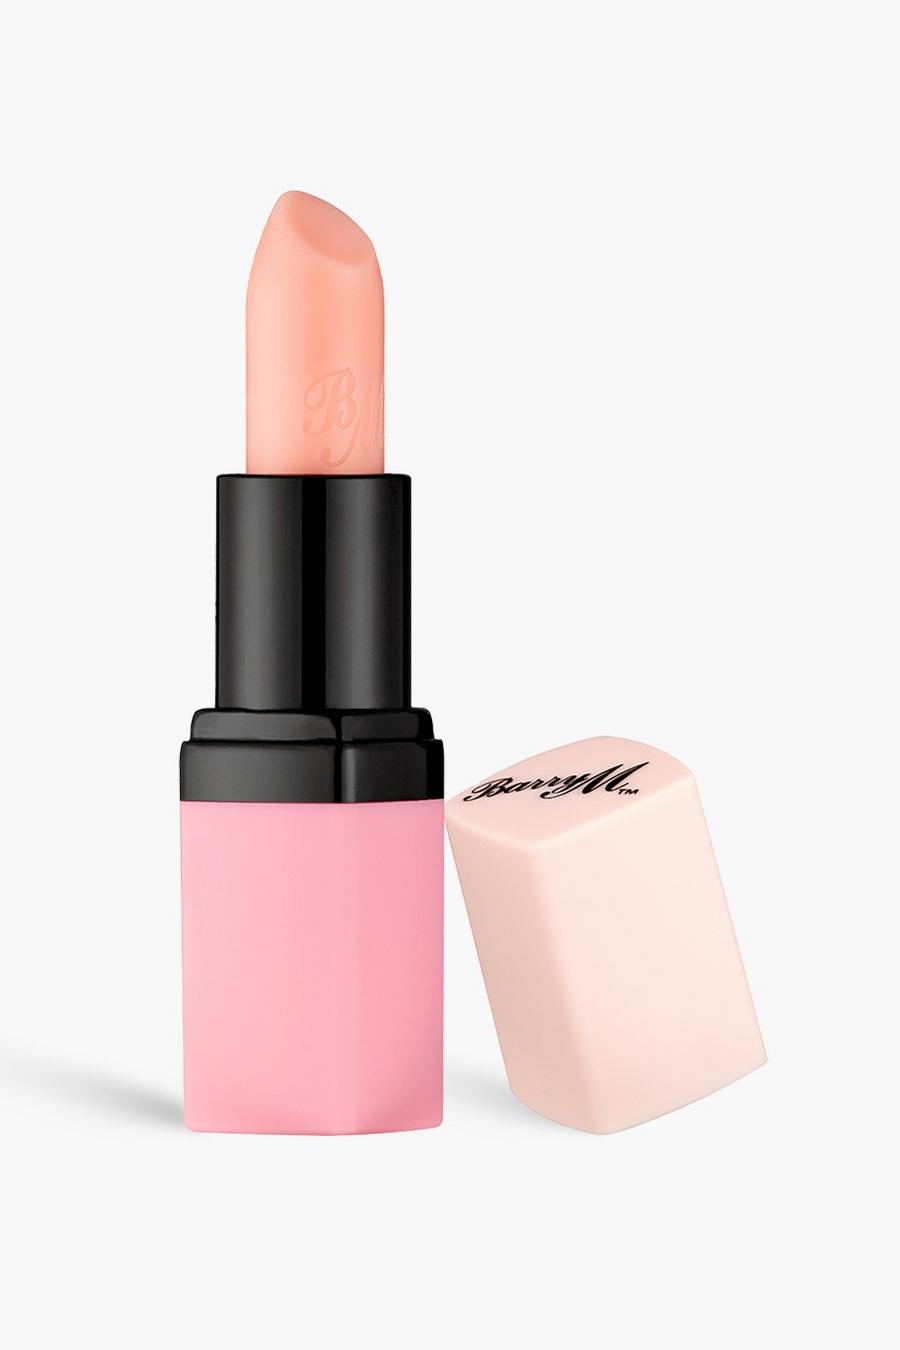 Pink rose Barry M Colour Changing Lip Paint